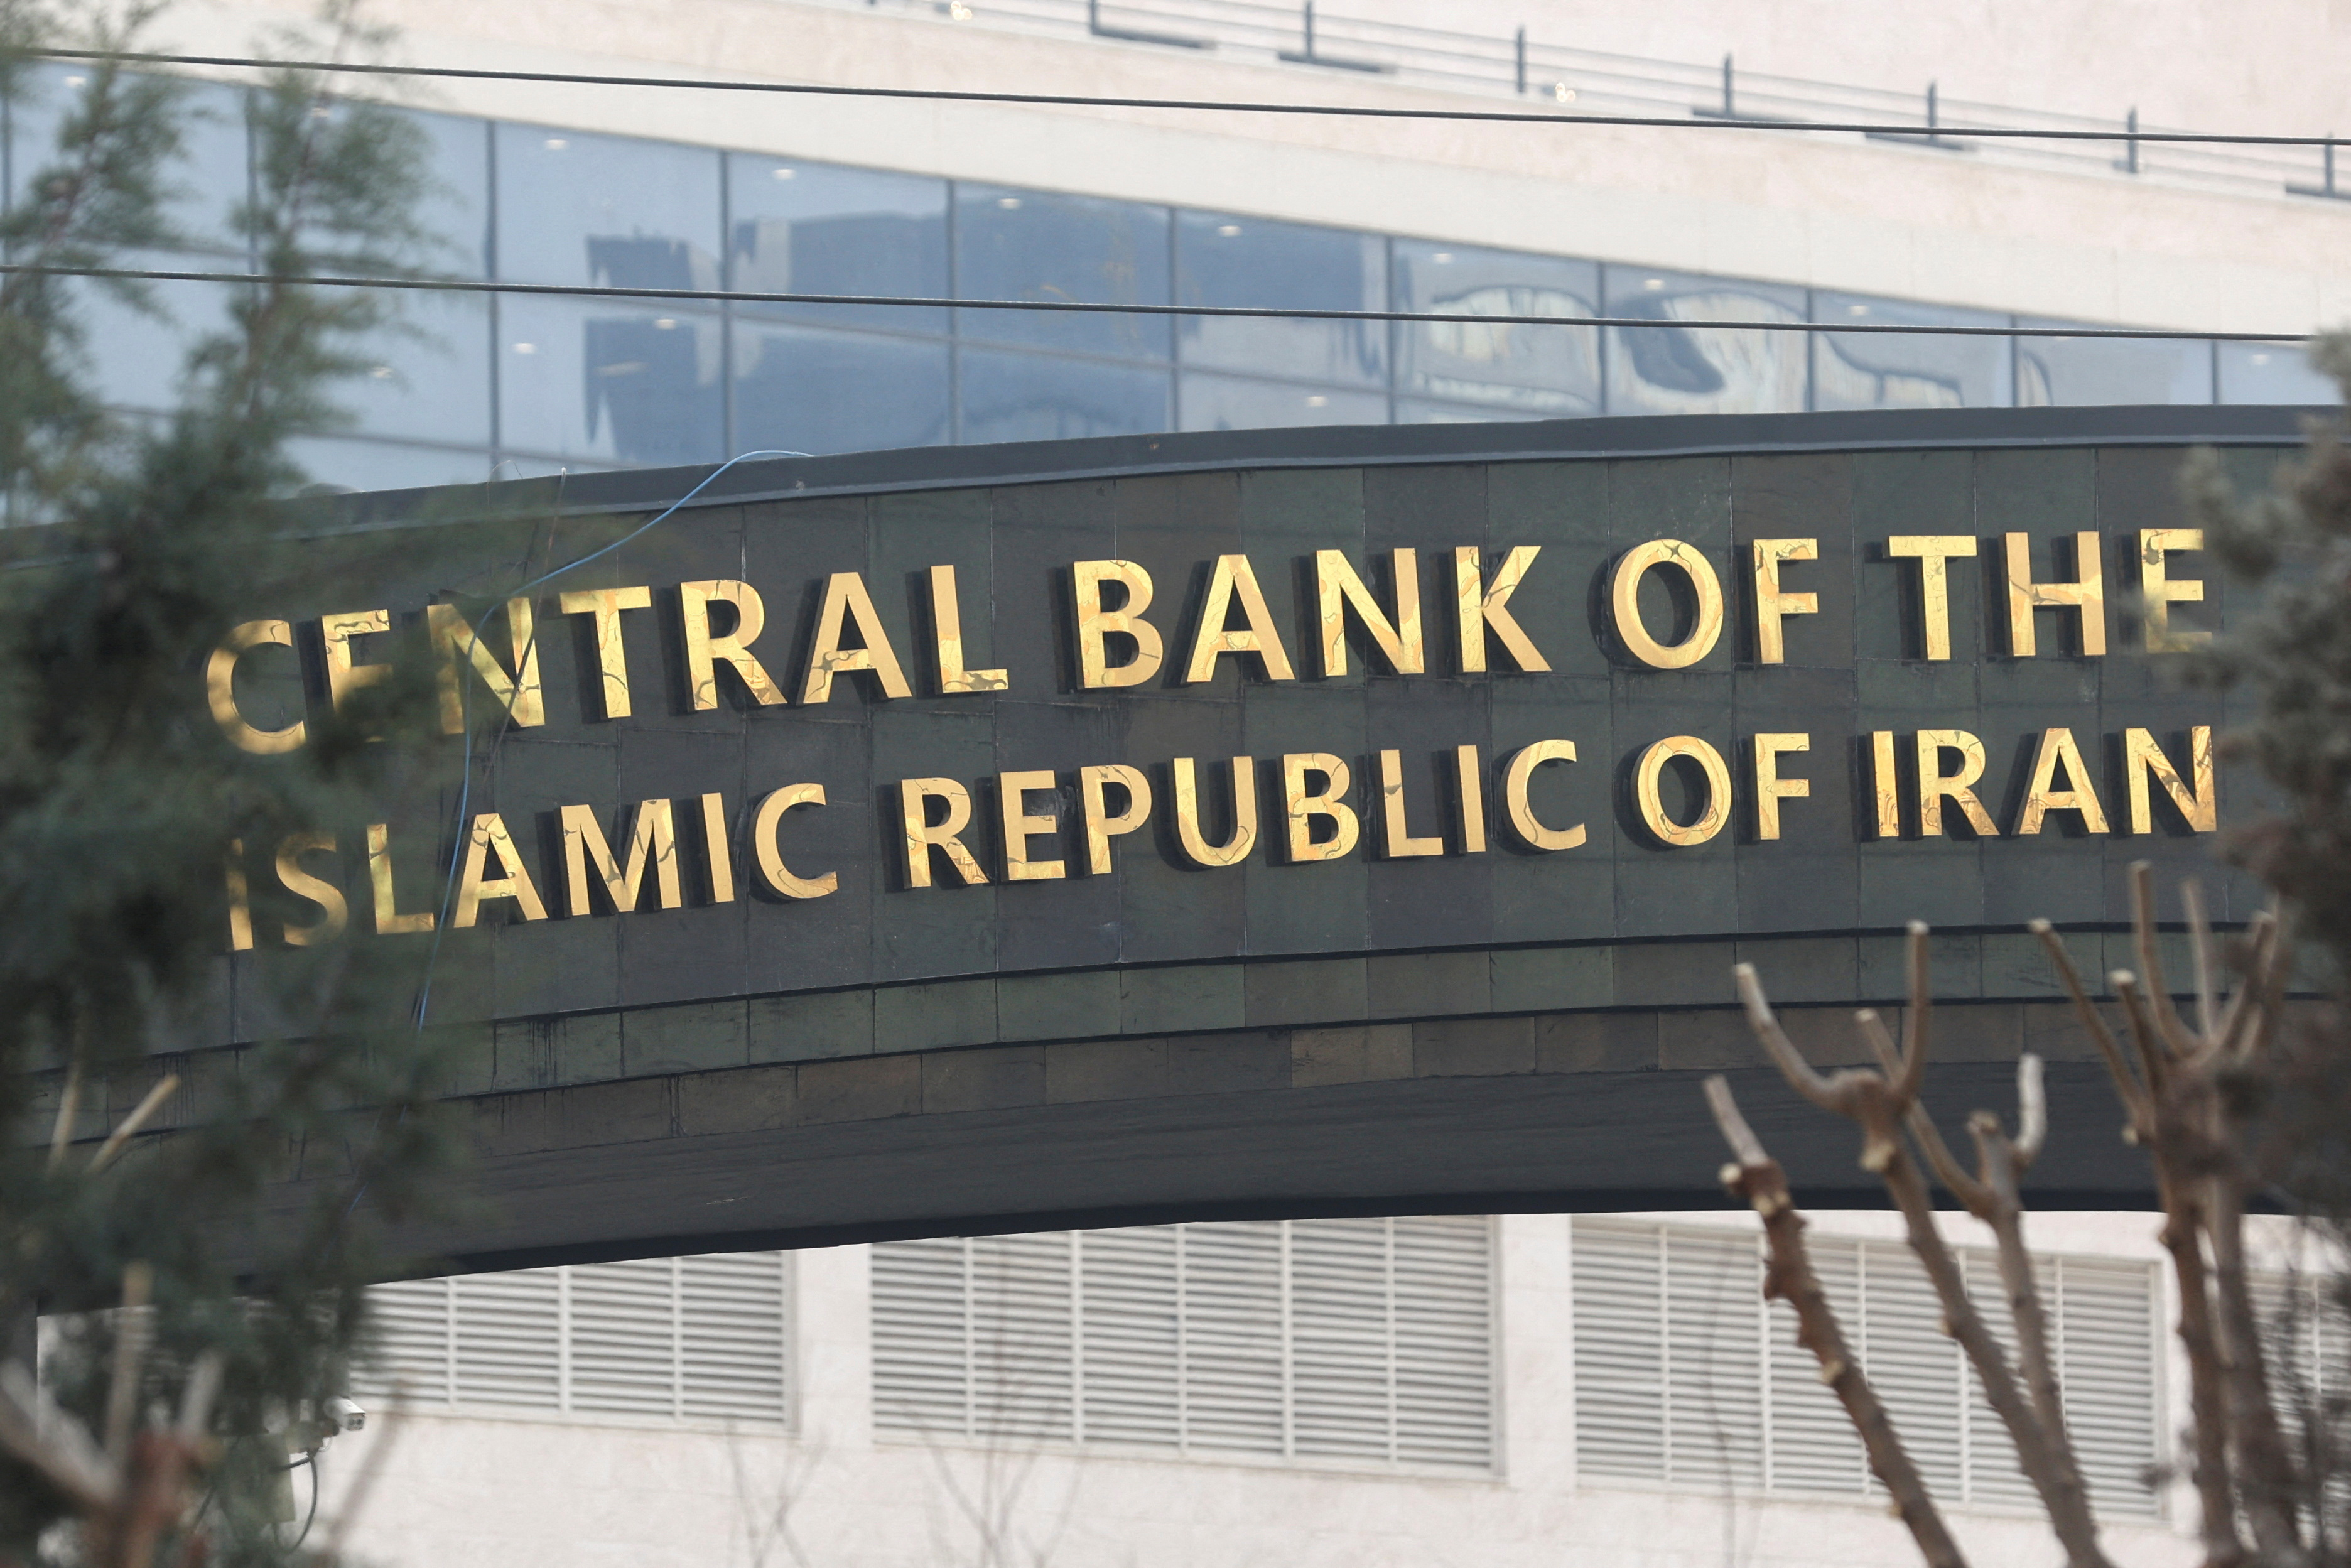 The sign of the Central Bank of the Islamic Republic of Iran is seen in Tehran